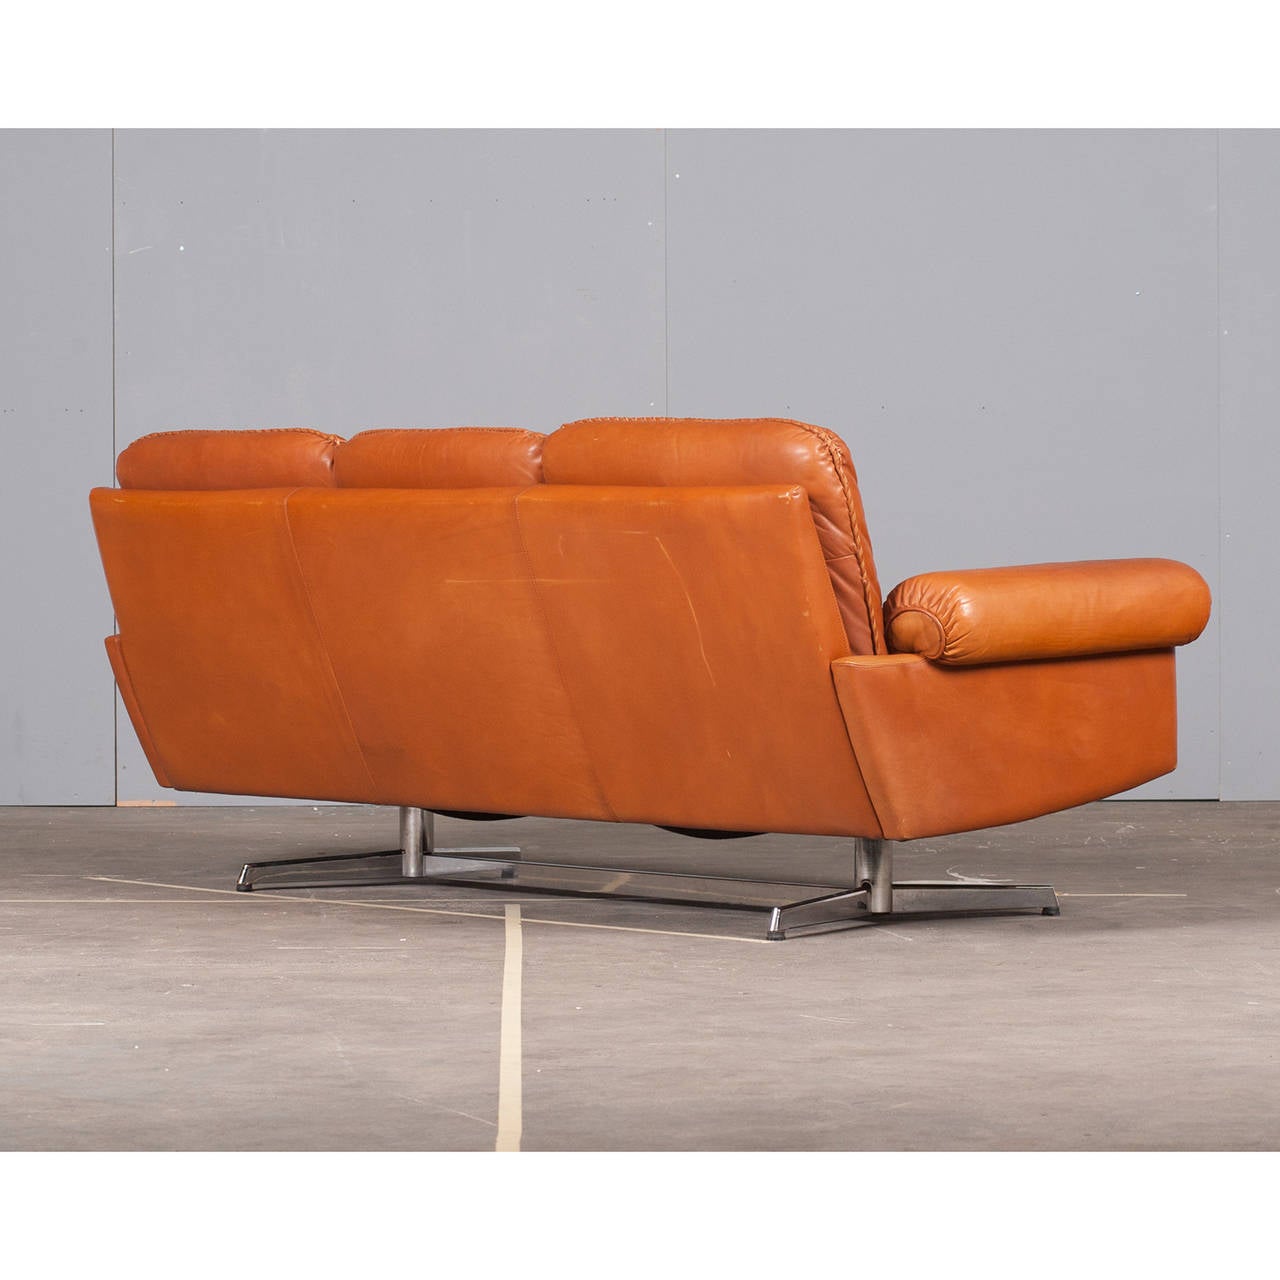 Swiss Three-Seater Sofa in Caramel Leather with Steel Base by De Sede, 1960s For Sale 2